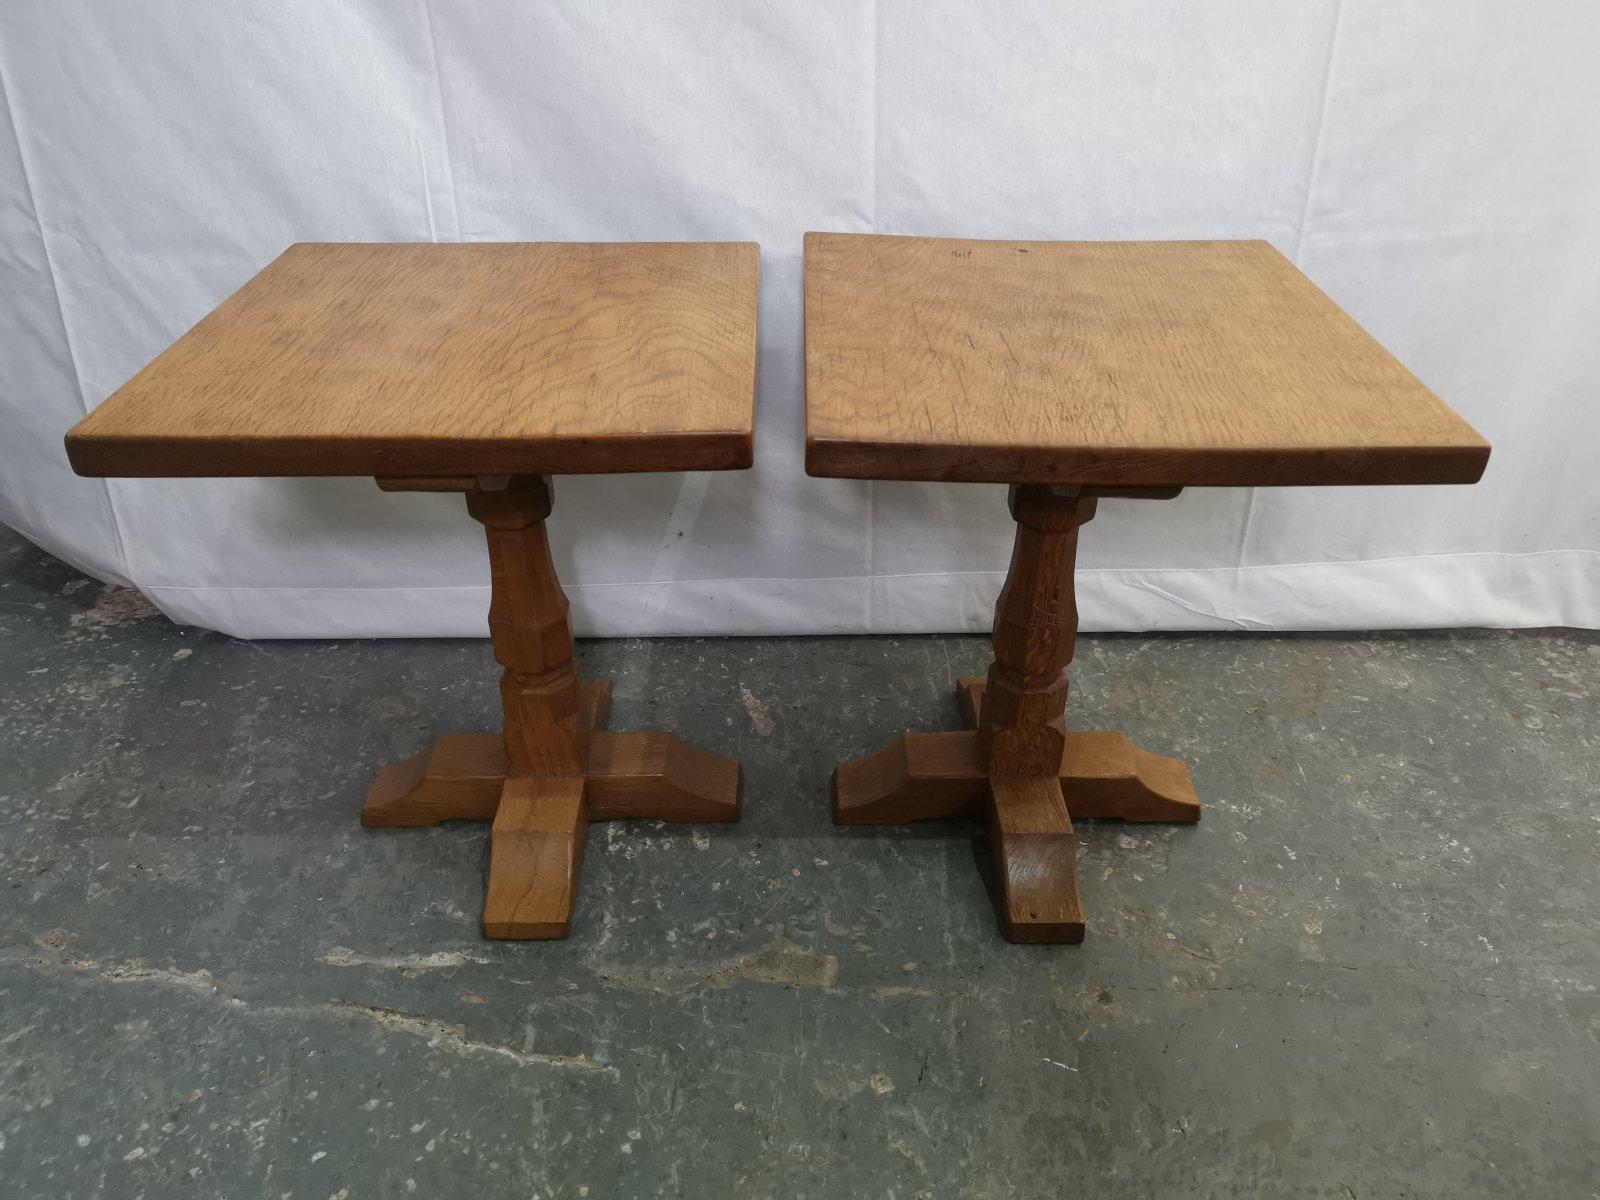 Robert Thompson Mouseman, after a design by.
A rare little pair of Arts and Crafts Yorkshire school oak pedestal side tables with Thompson's trademark pedestals, on four bracket style feet and adzed finish.
One of the apprentices, earlier quality.